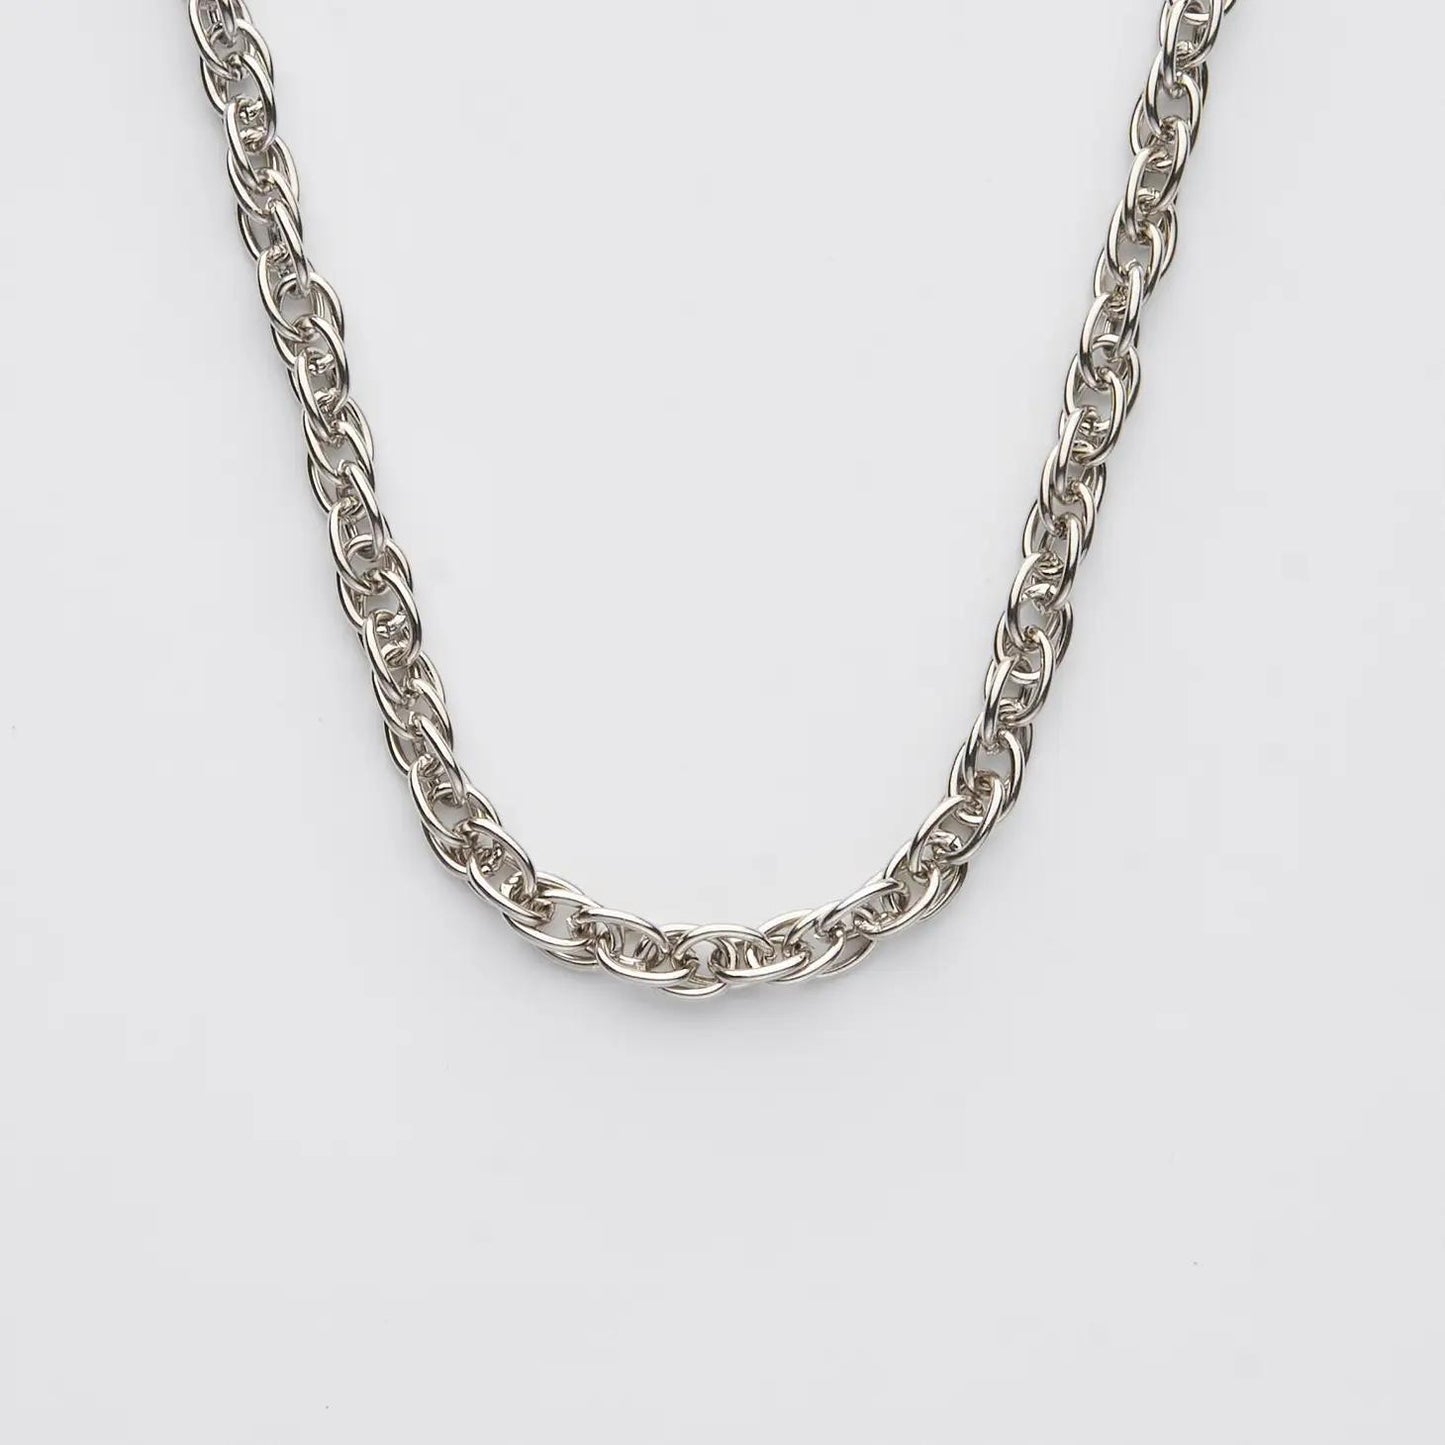 The Silver Brawn Necklace